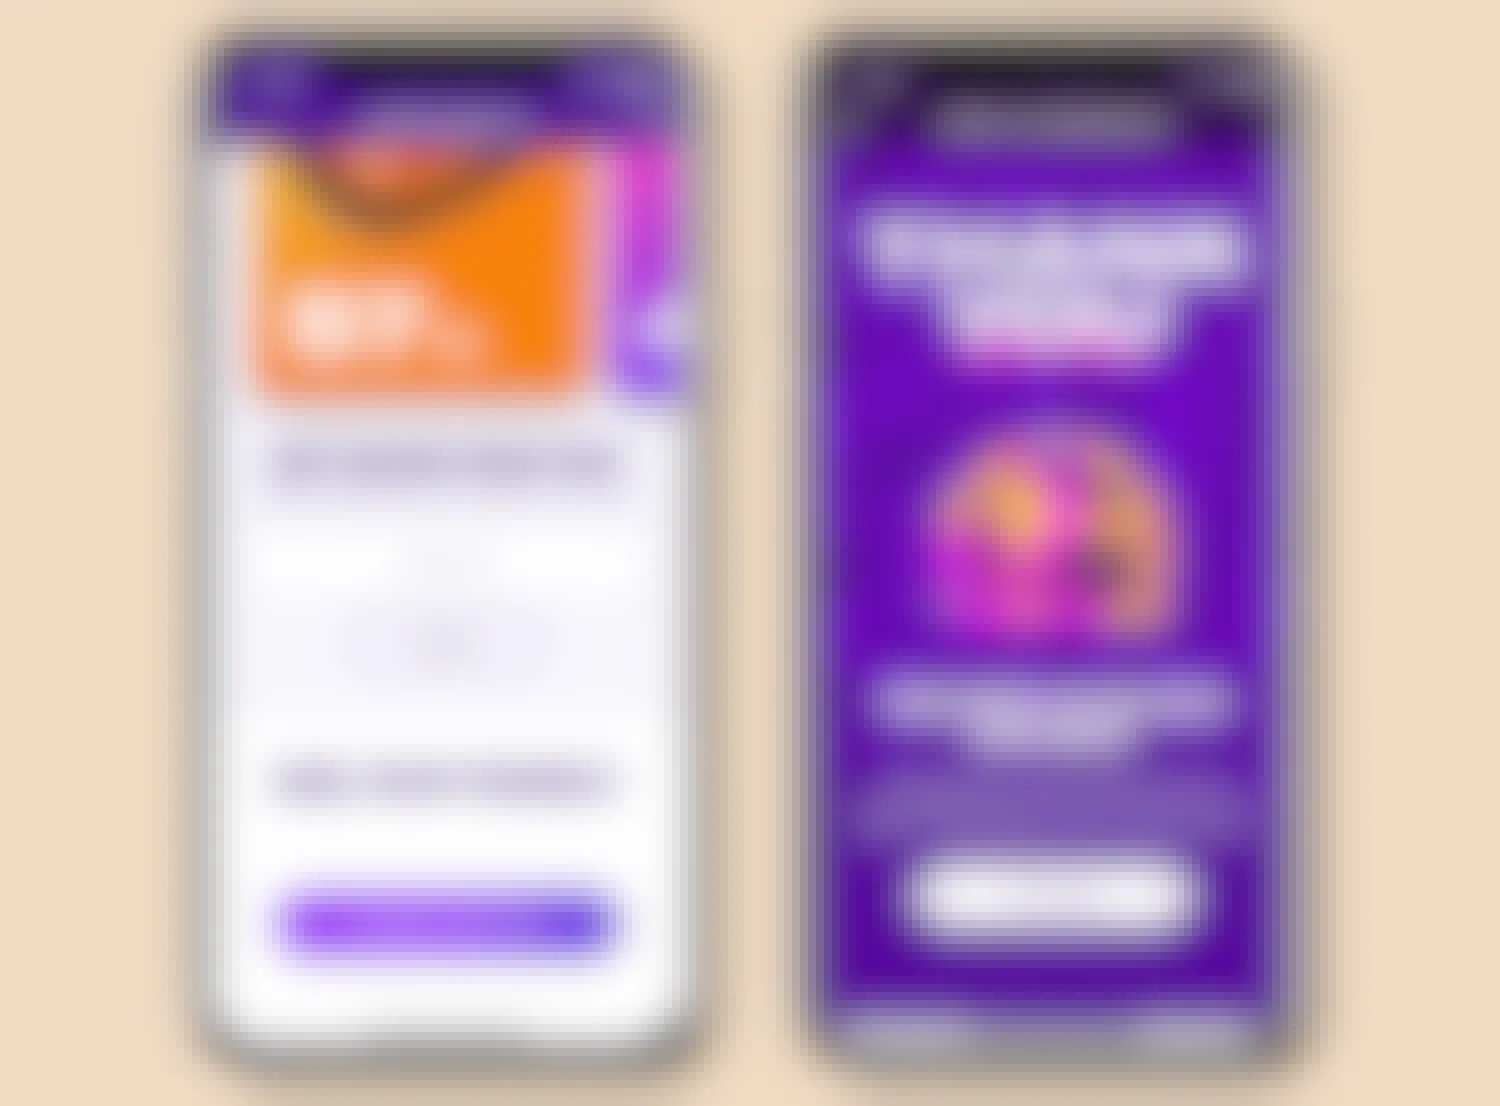 taco bell voting app screenshots for write-ins